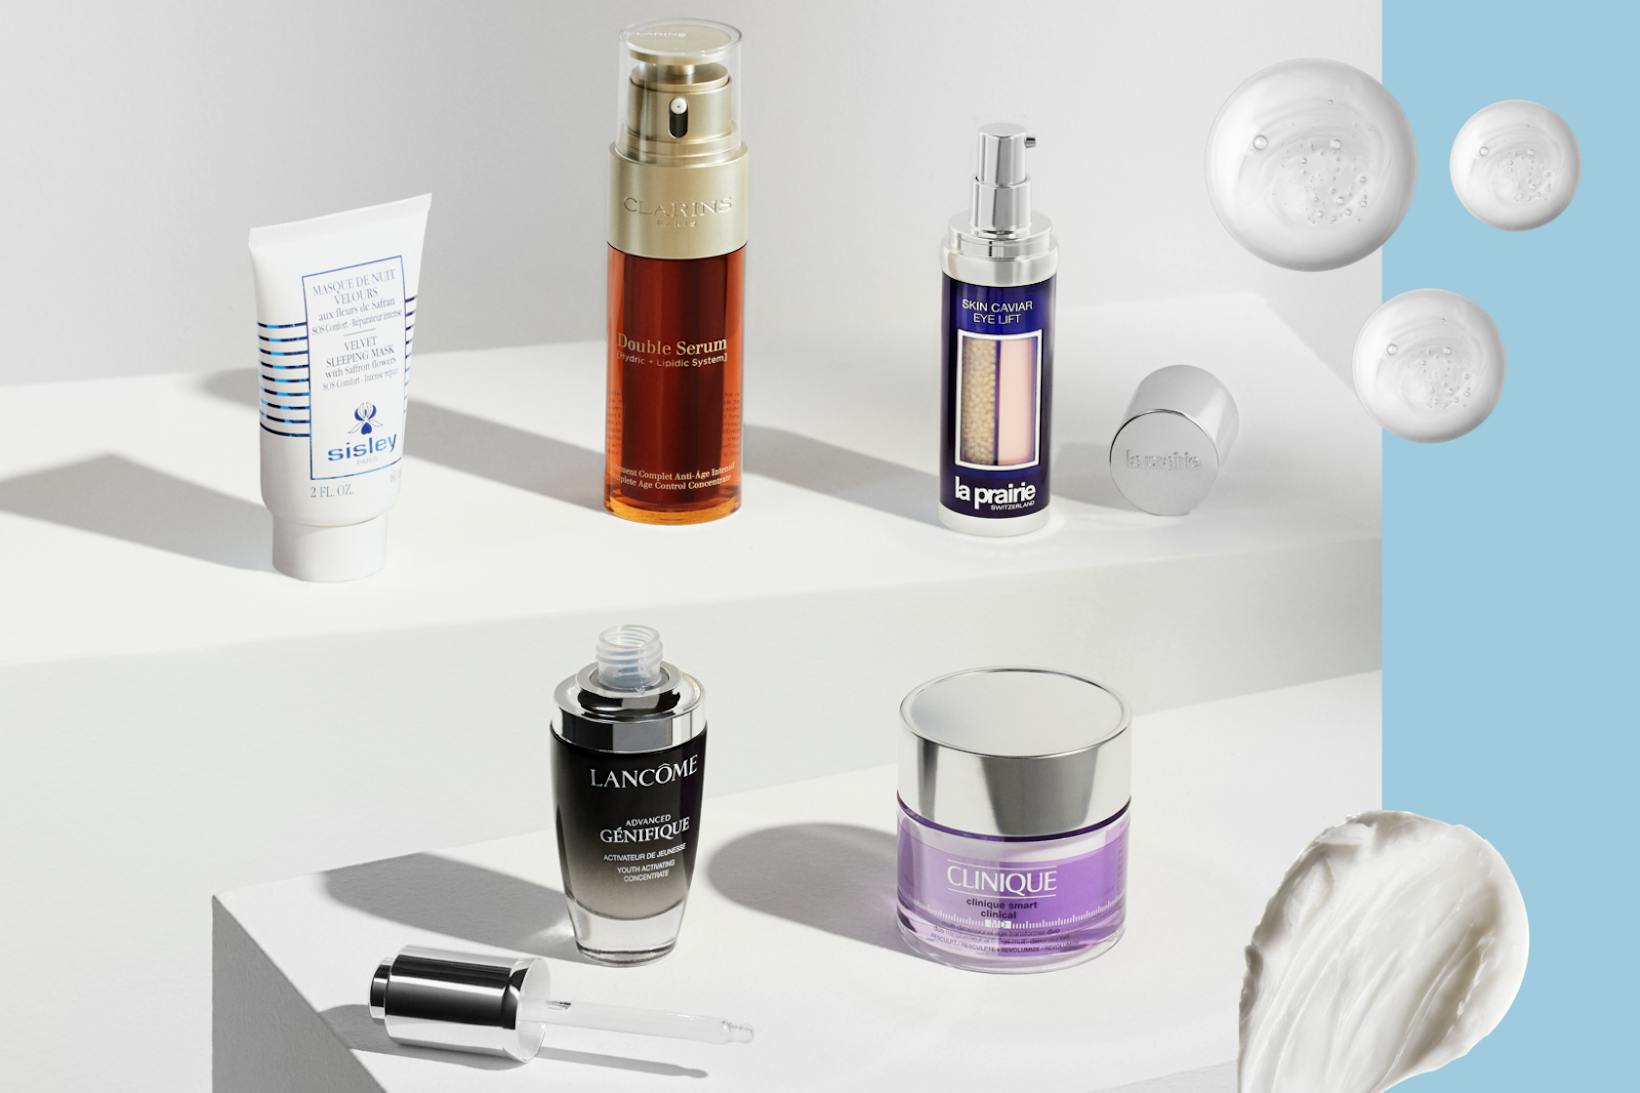 Skincare products five to shop from Clarins, Clinique